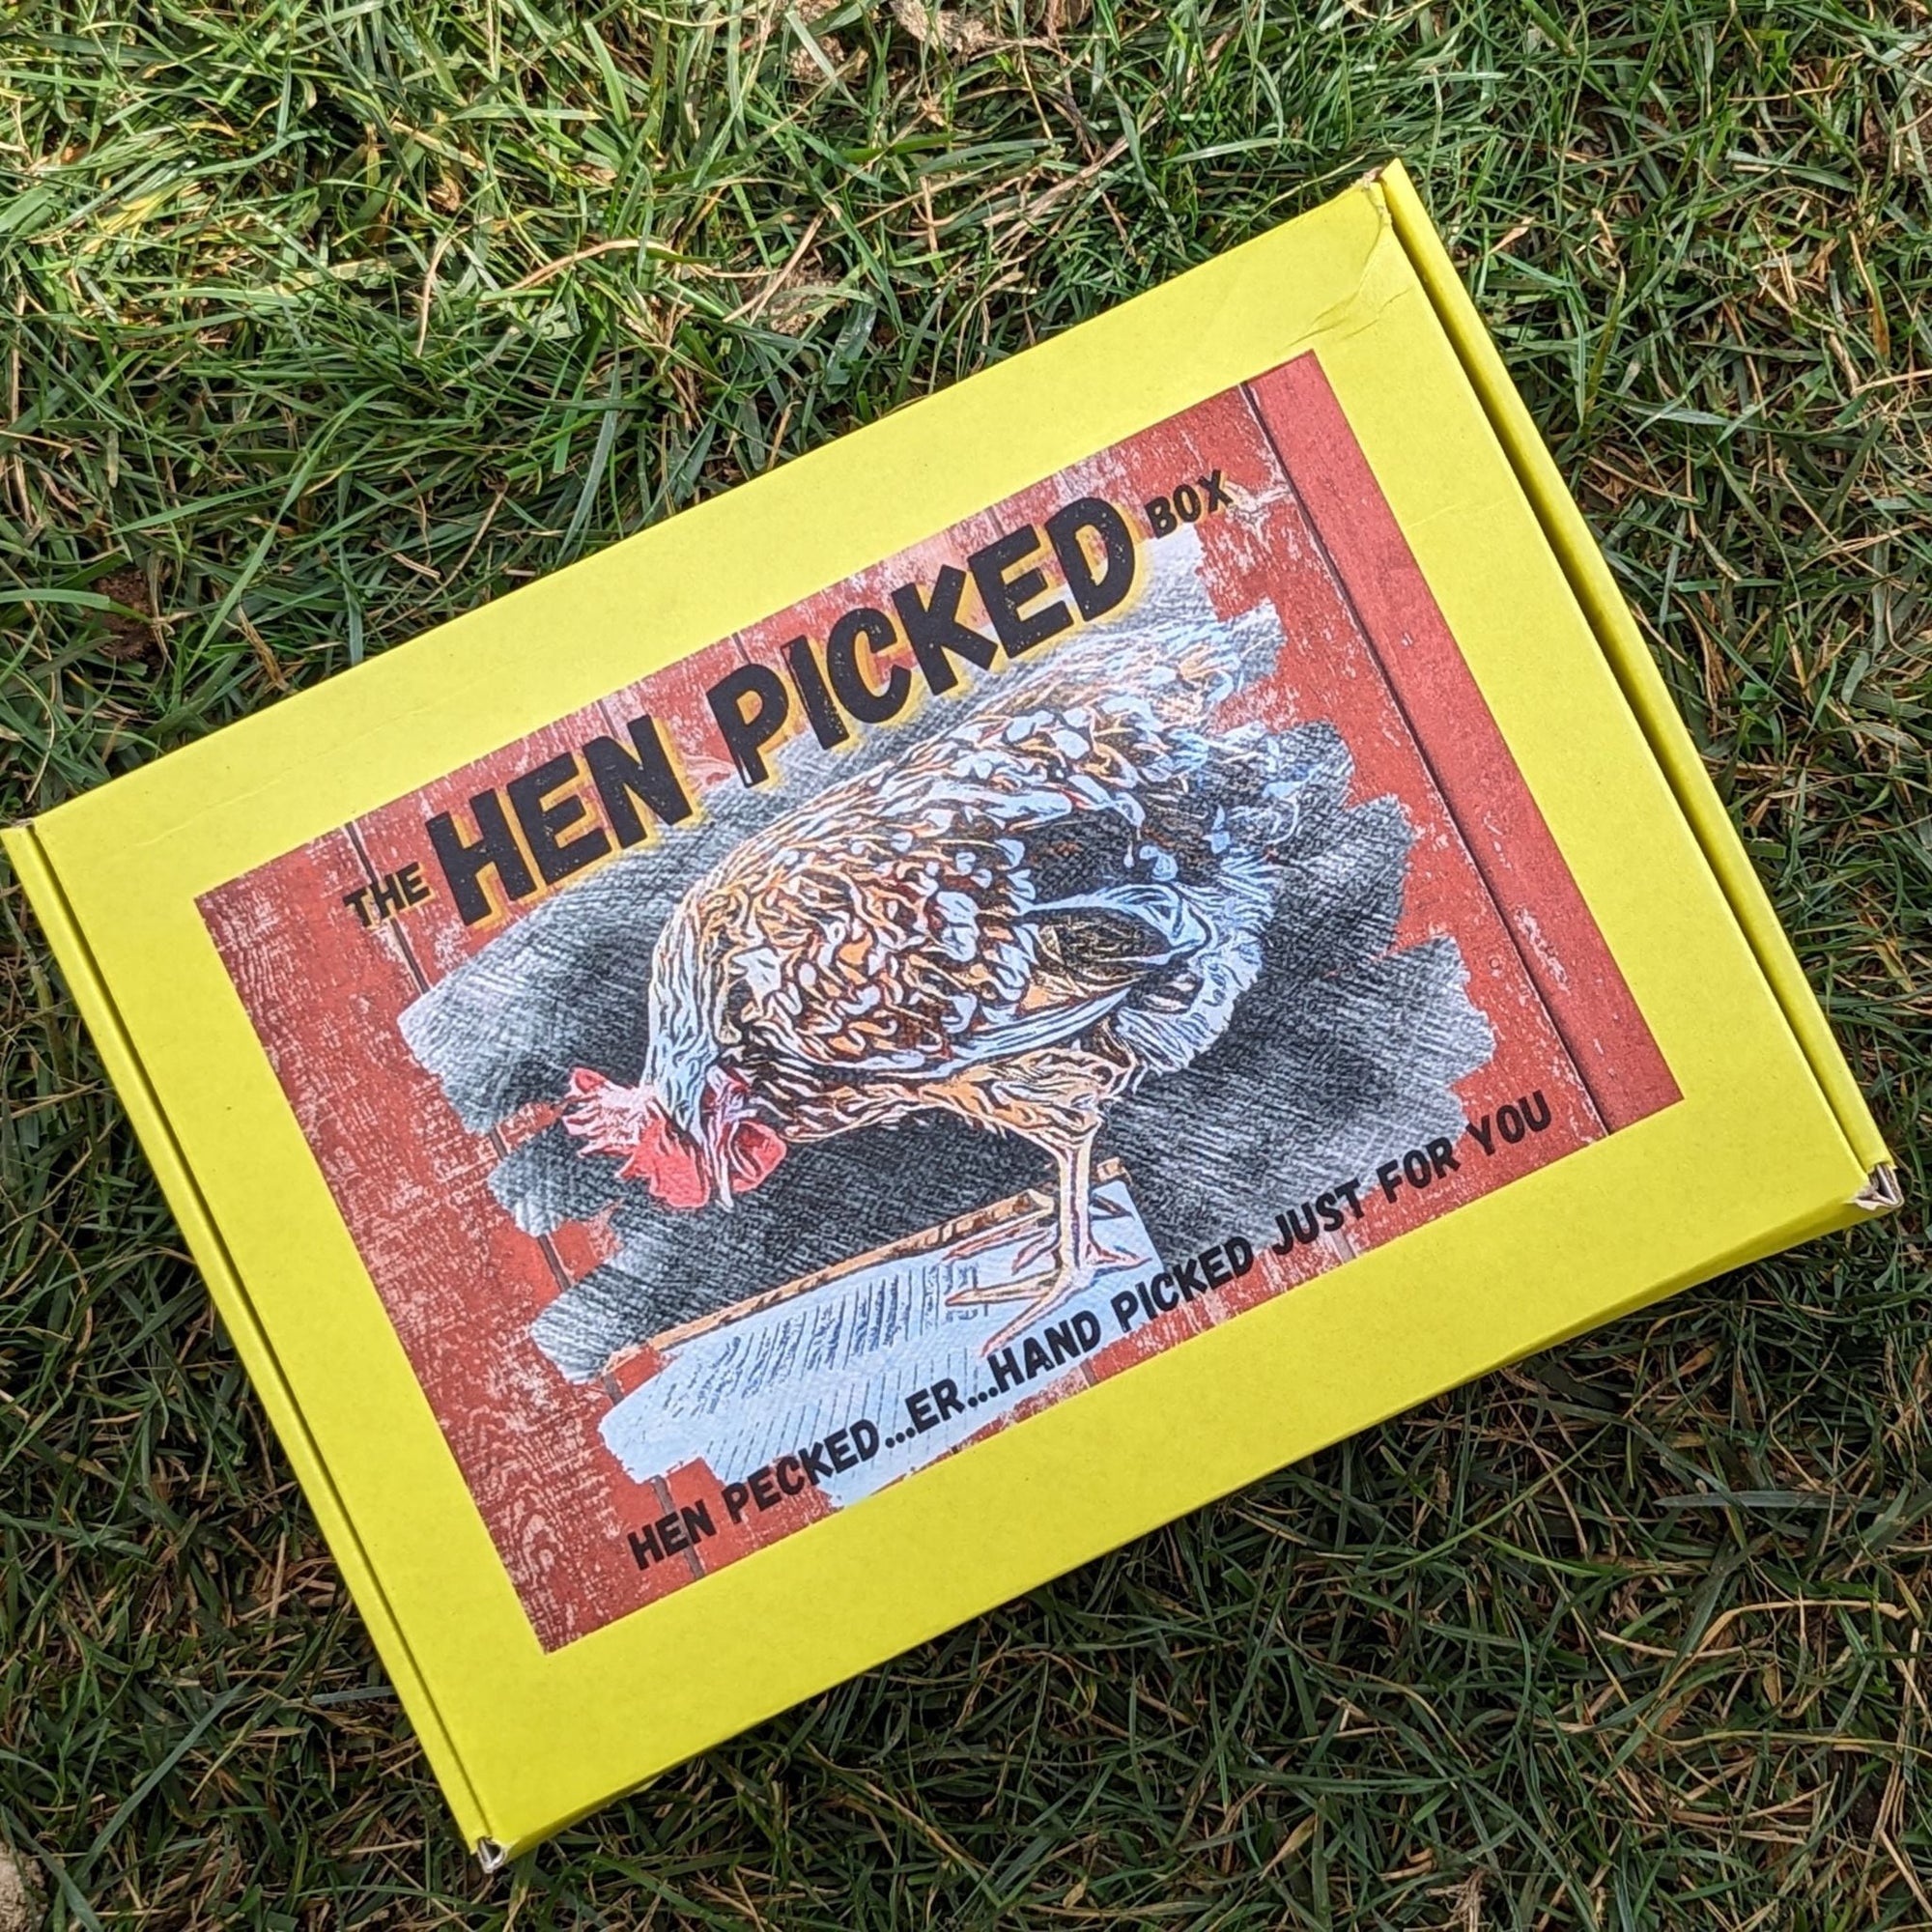 The HEN PICKED Box - Cluck It All Farms